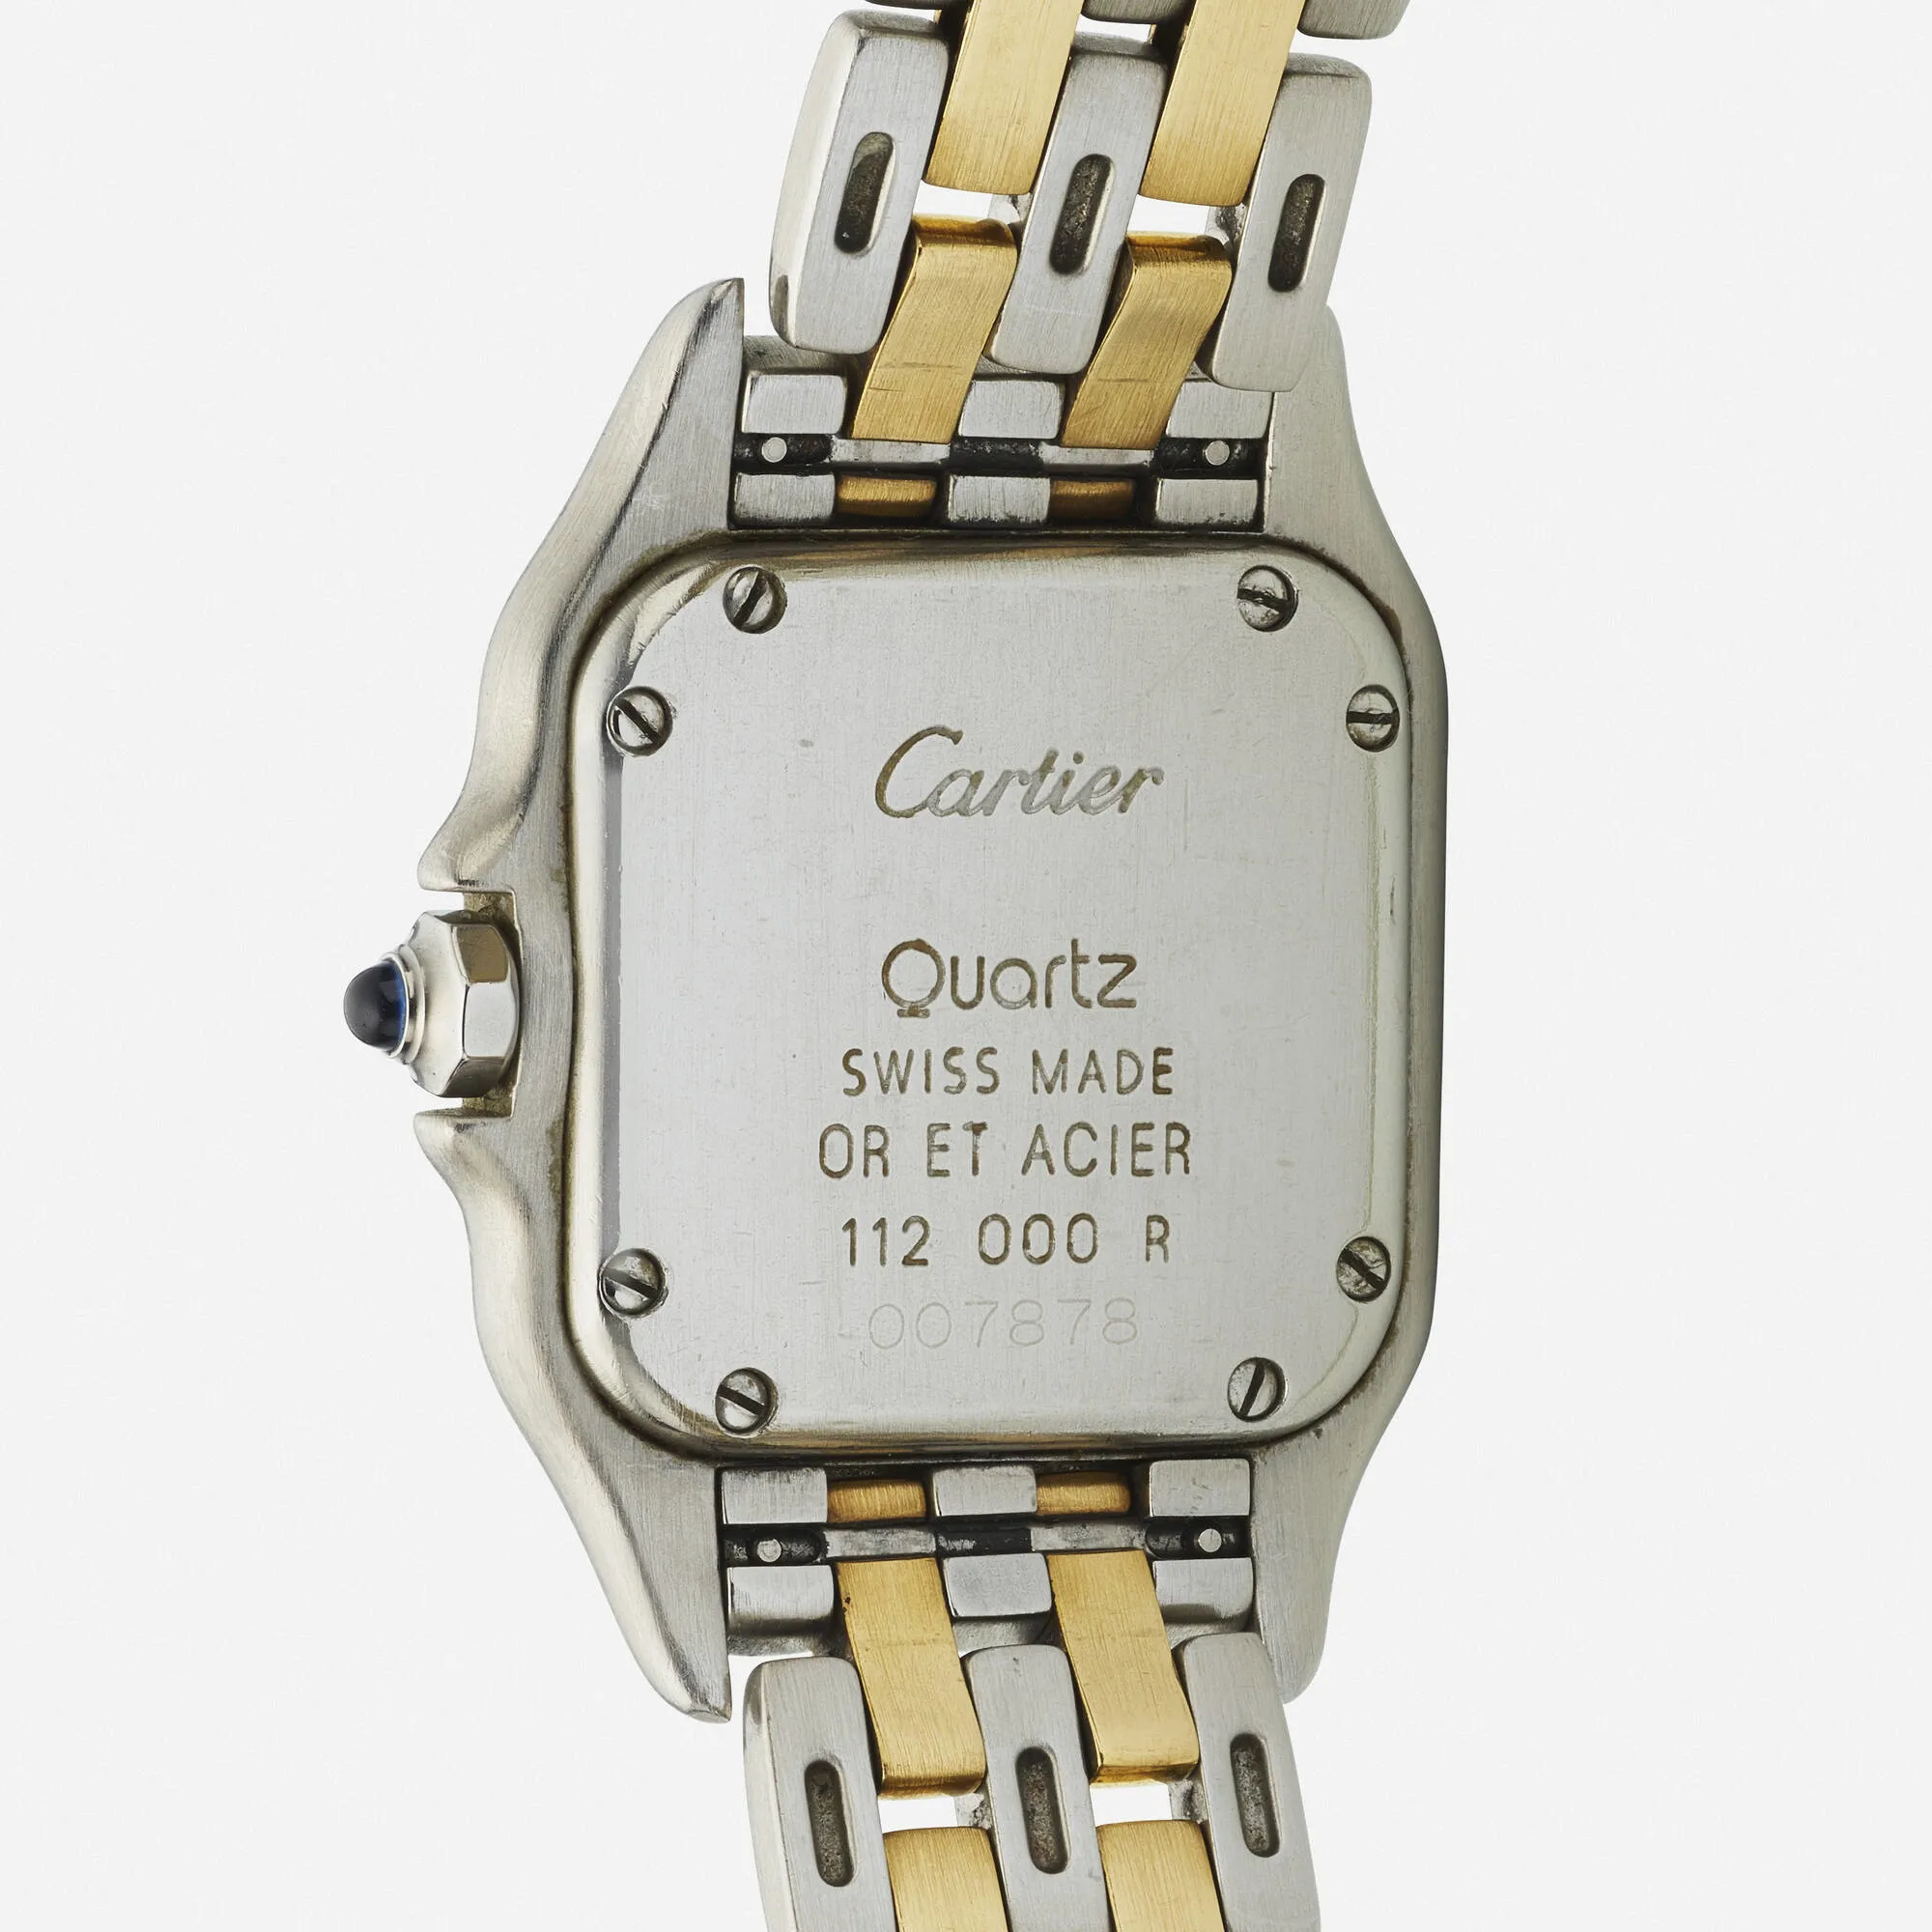 Cartier Panthère 112000R 22mm Yellow gold and stainless steel Champagne 2